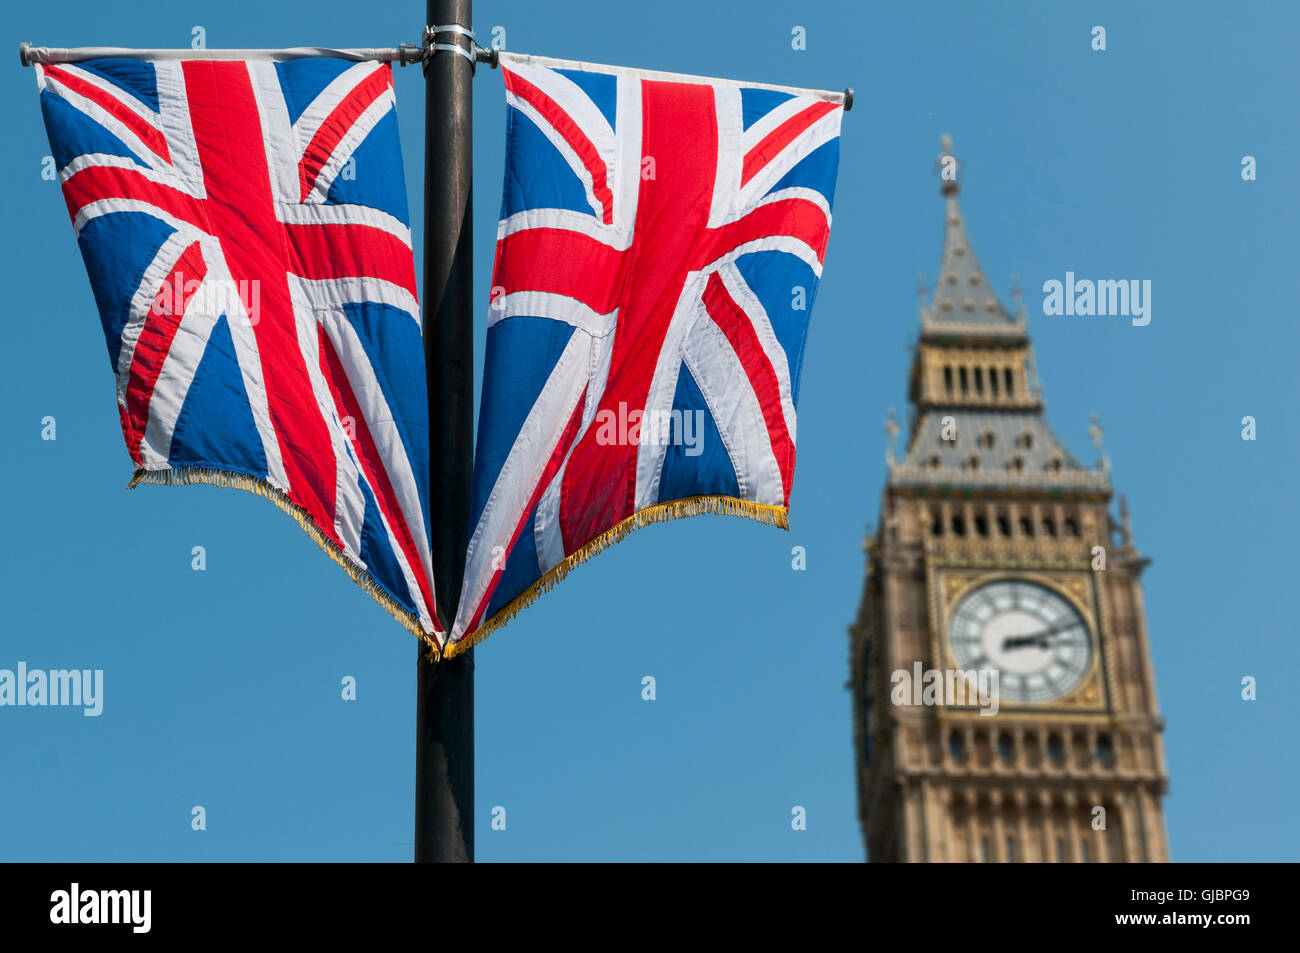 The Union Jack flag flying in front of the clock tower, commonly referred to as Big Ben, of the Palace of Westminster. Stock Photo